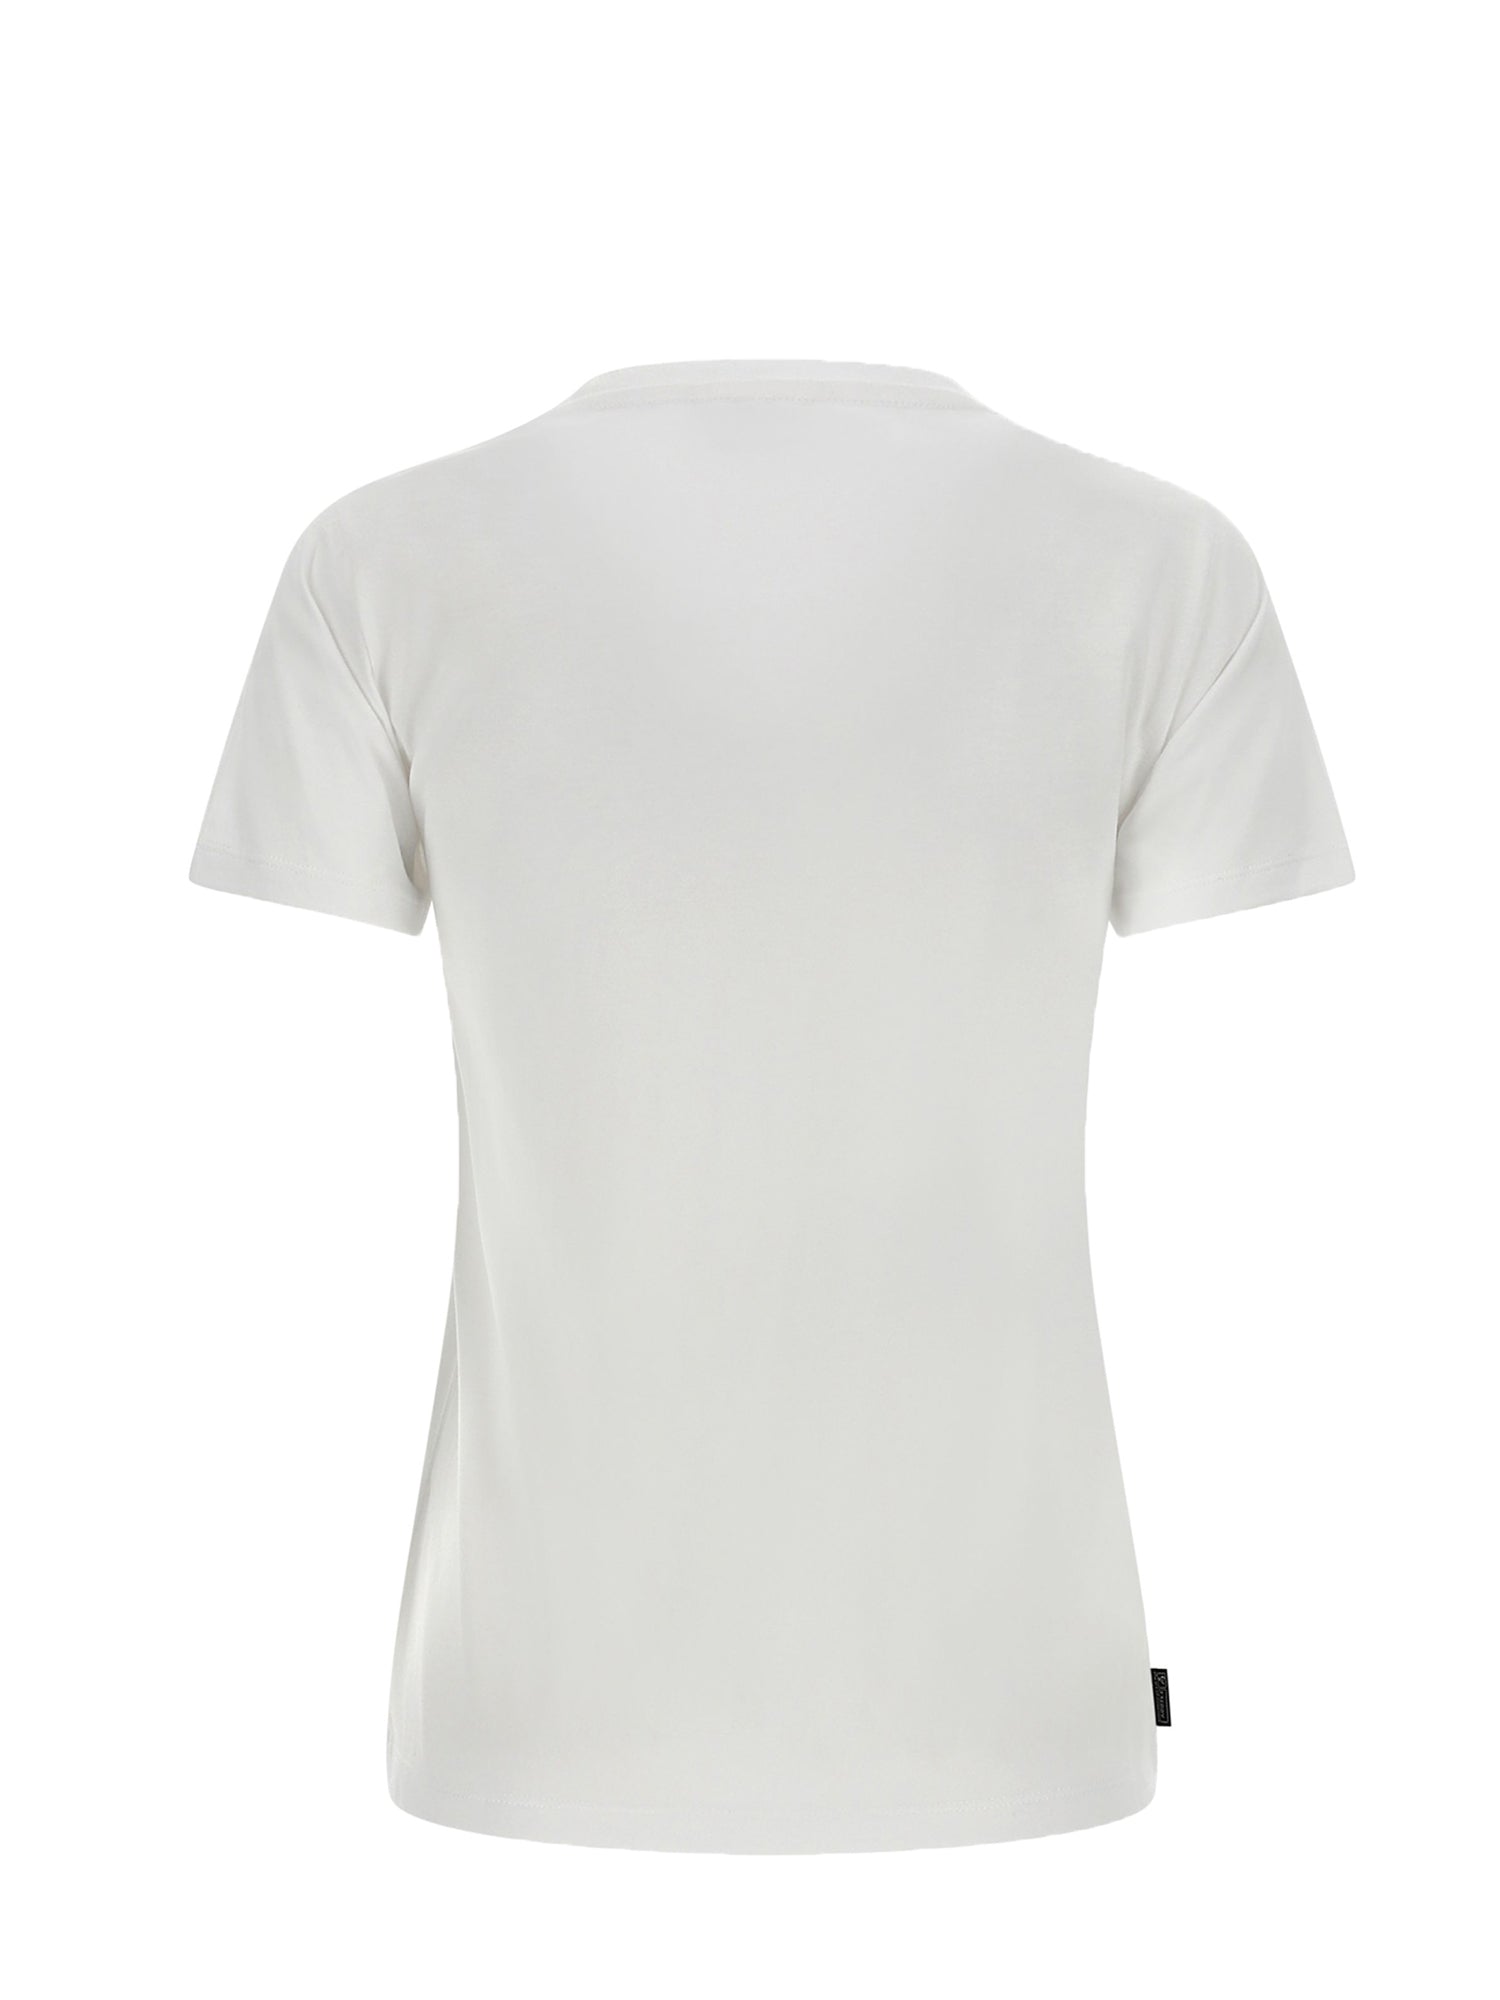 FREDDY T-SHIRT CON STAMPA FLOREALE BIANCO